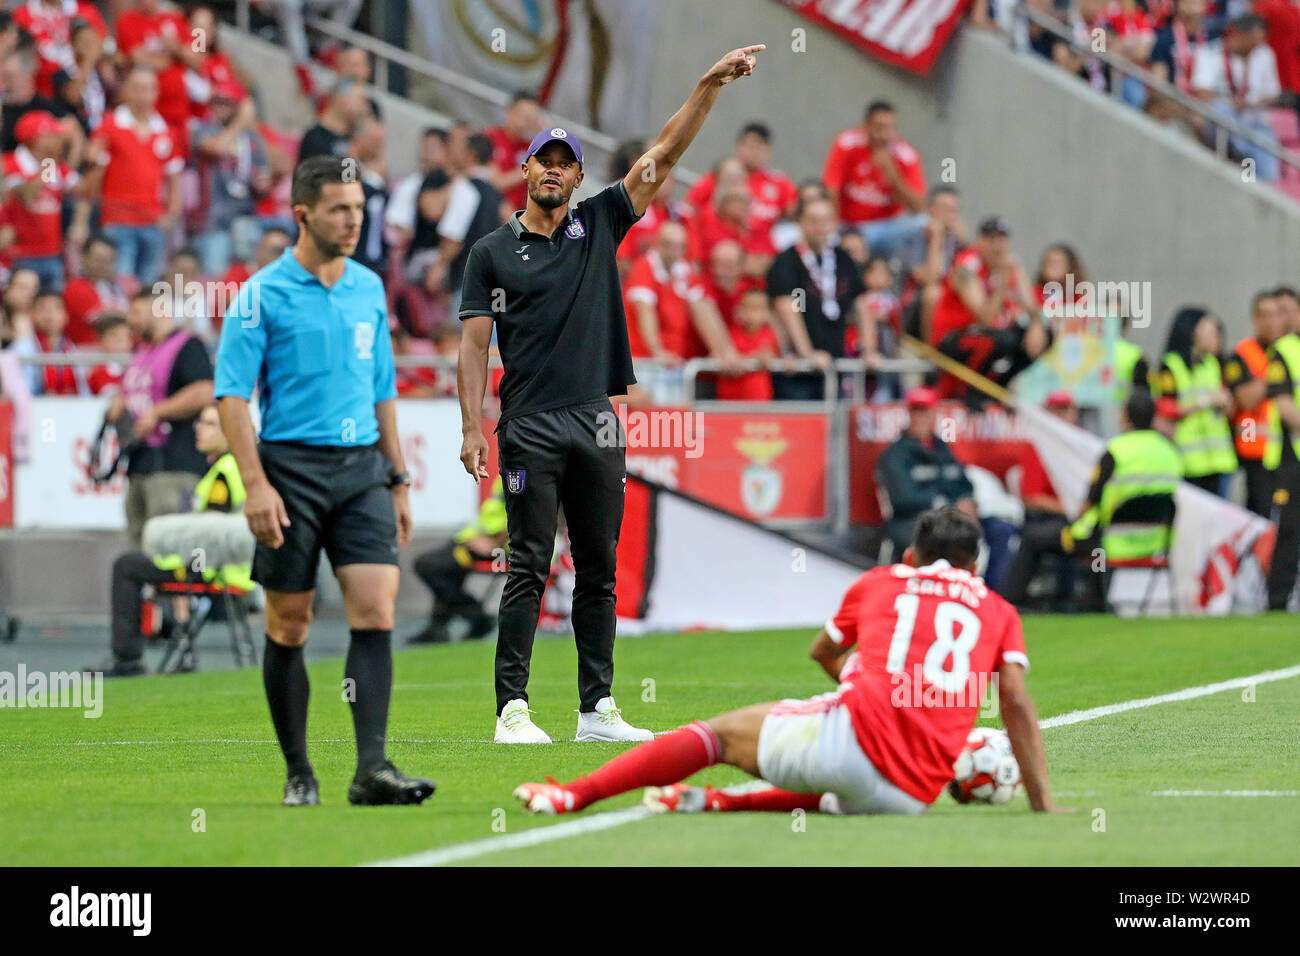 Lisbon, Portugal. 10th July, 2019. Coach Vincent Kompany (M) of Royal Sporting Club Anderlecht in action during the Pre-Season football match 2019/2020 between SL Benfica vs Royal Sporting Club Anderlecht.(Final score: SL Benfica 1 - 2 Royal Sporting Club Anderlecht) Credit: SOPA Images Limited/Alamy Live News Stock Photo